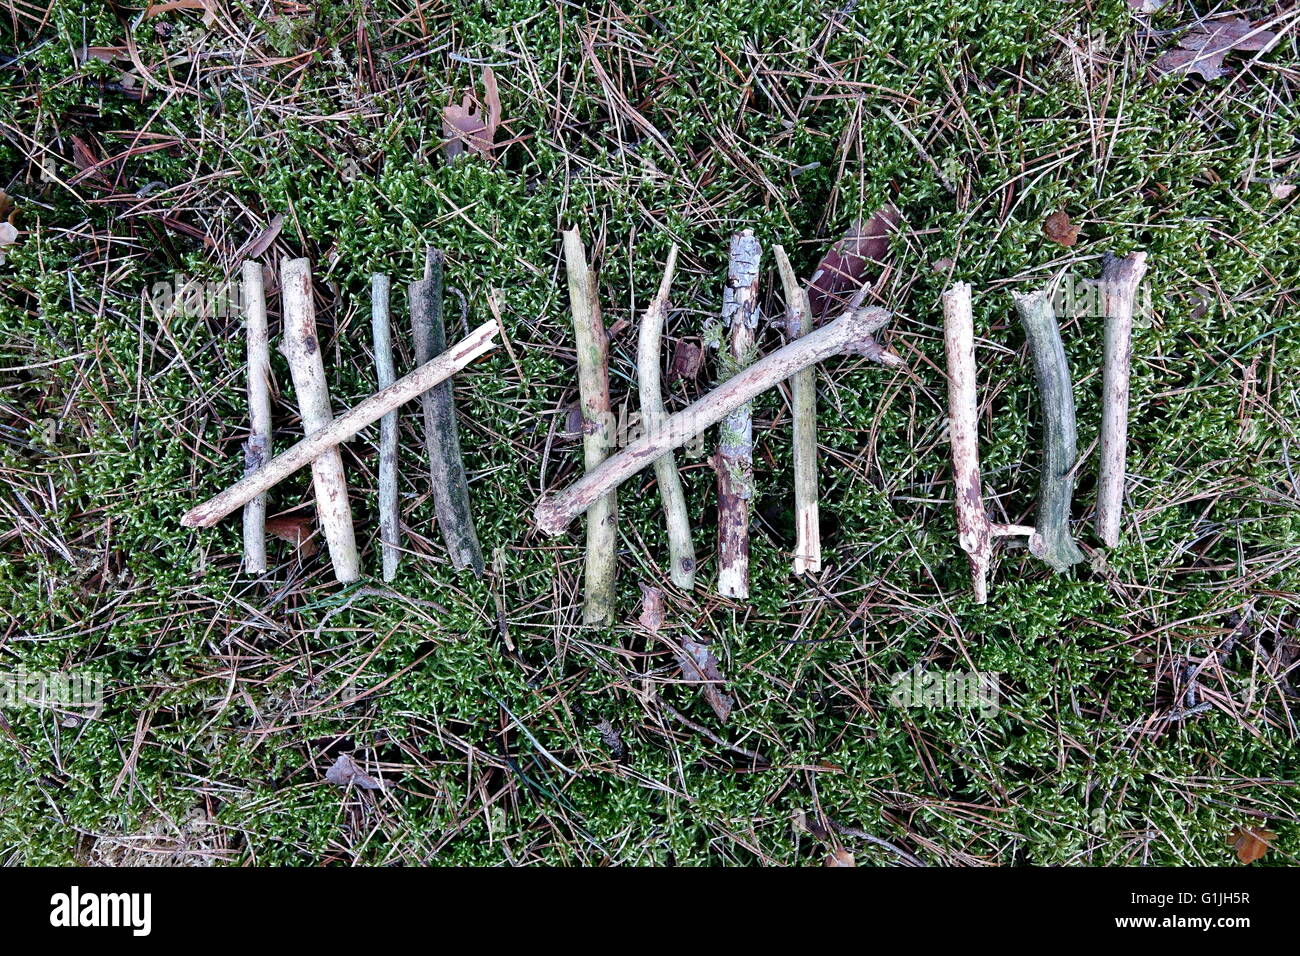 ILLUSTRATION . Thirteen sticks on a forest soil form a tally. The photo was taken on 11 March 2016. Photo: S. Steinach - NO WIRE SERVICE - Stock Photo